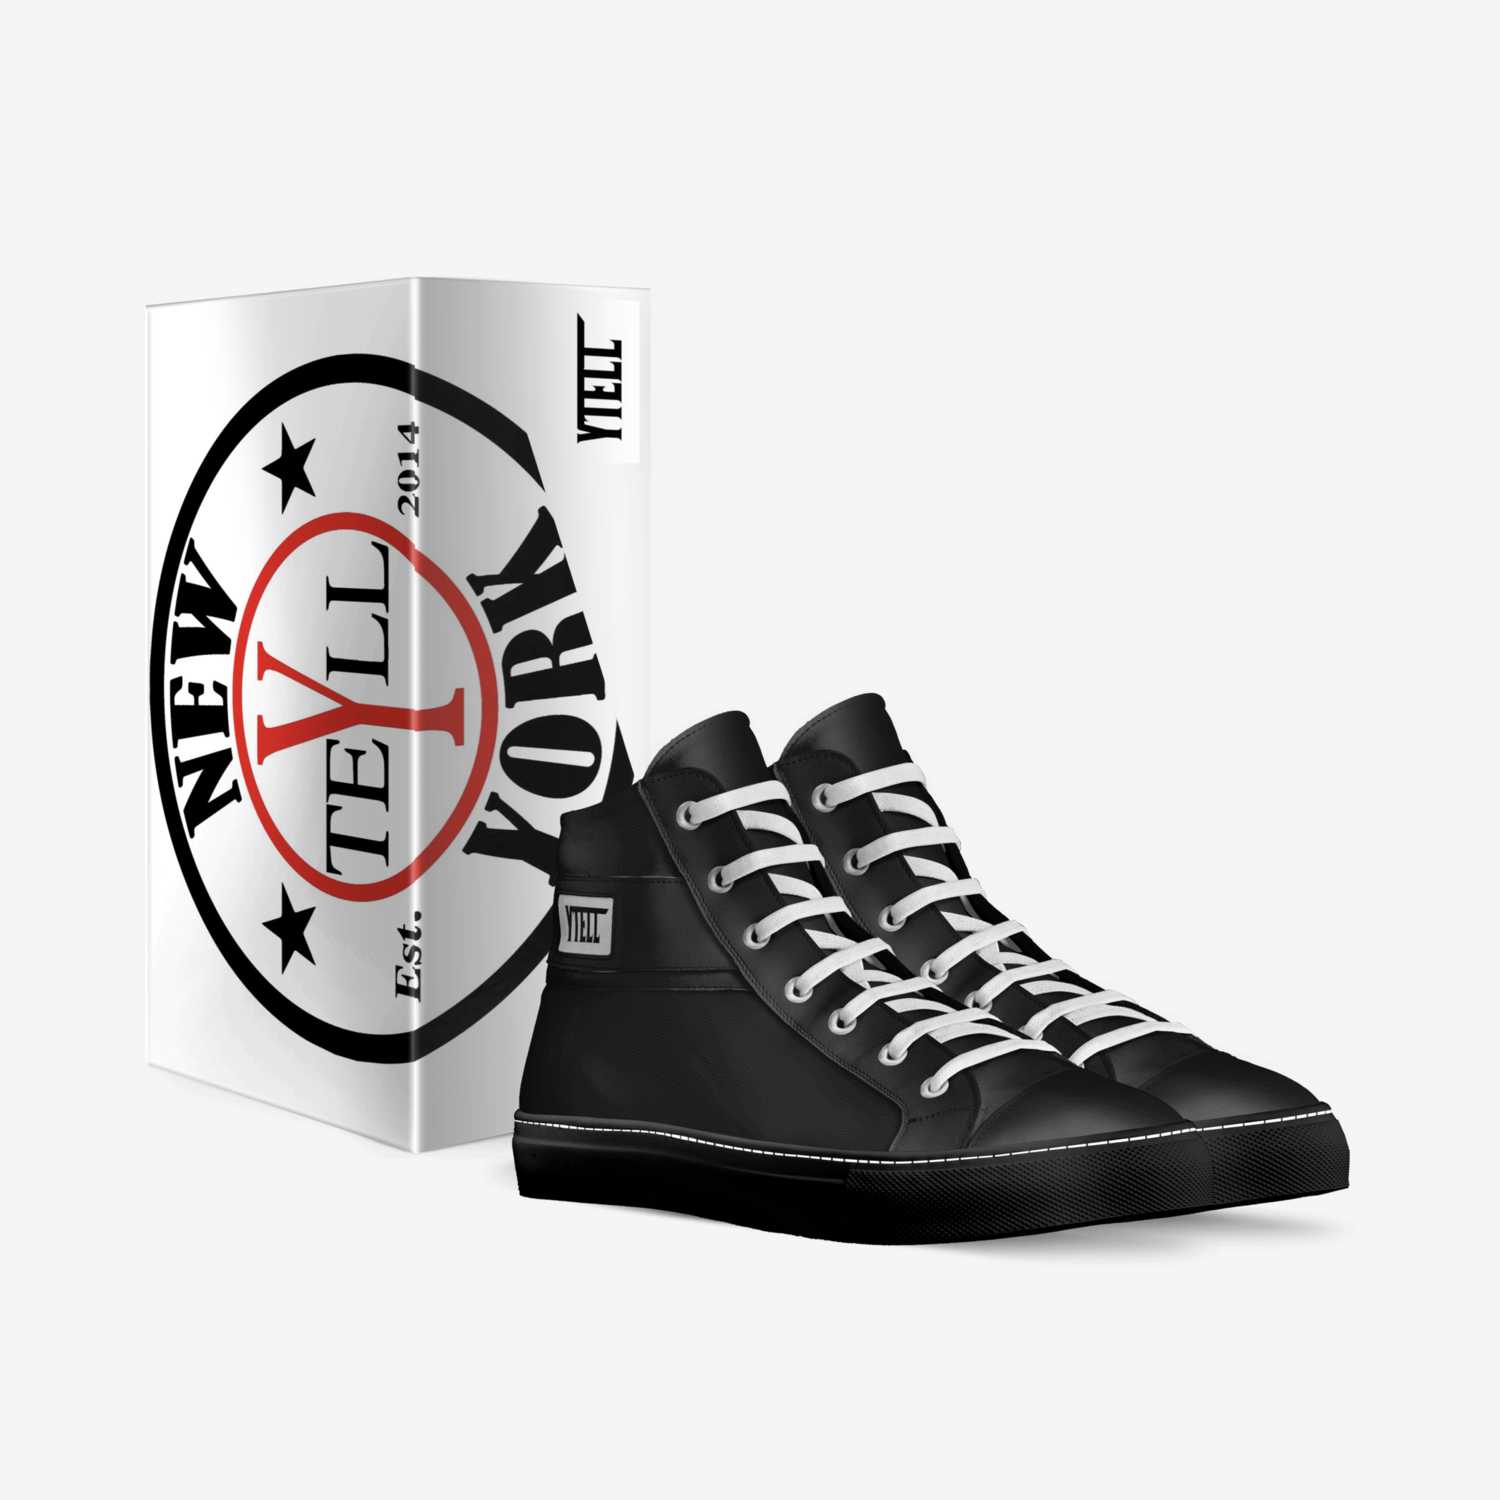 YTELL custom made in Italy shoes by Lesly Malave | Box view